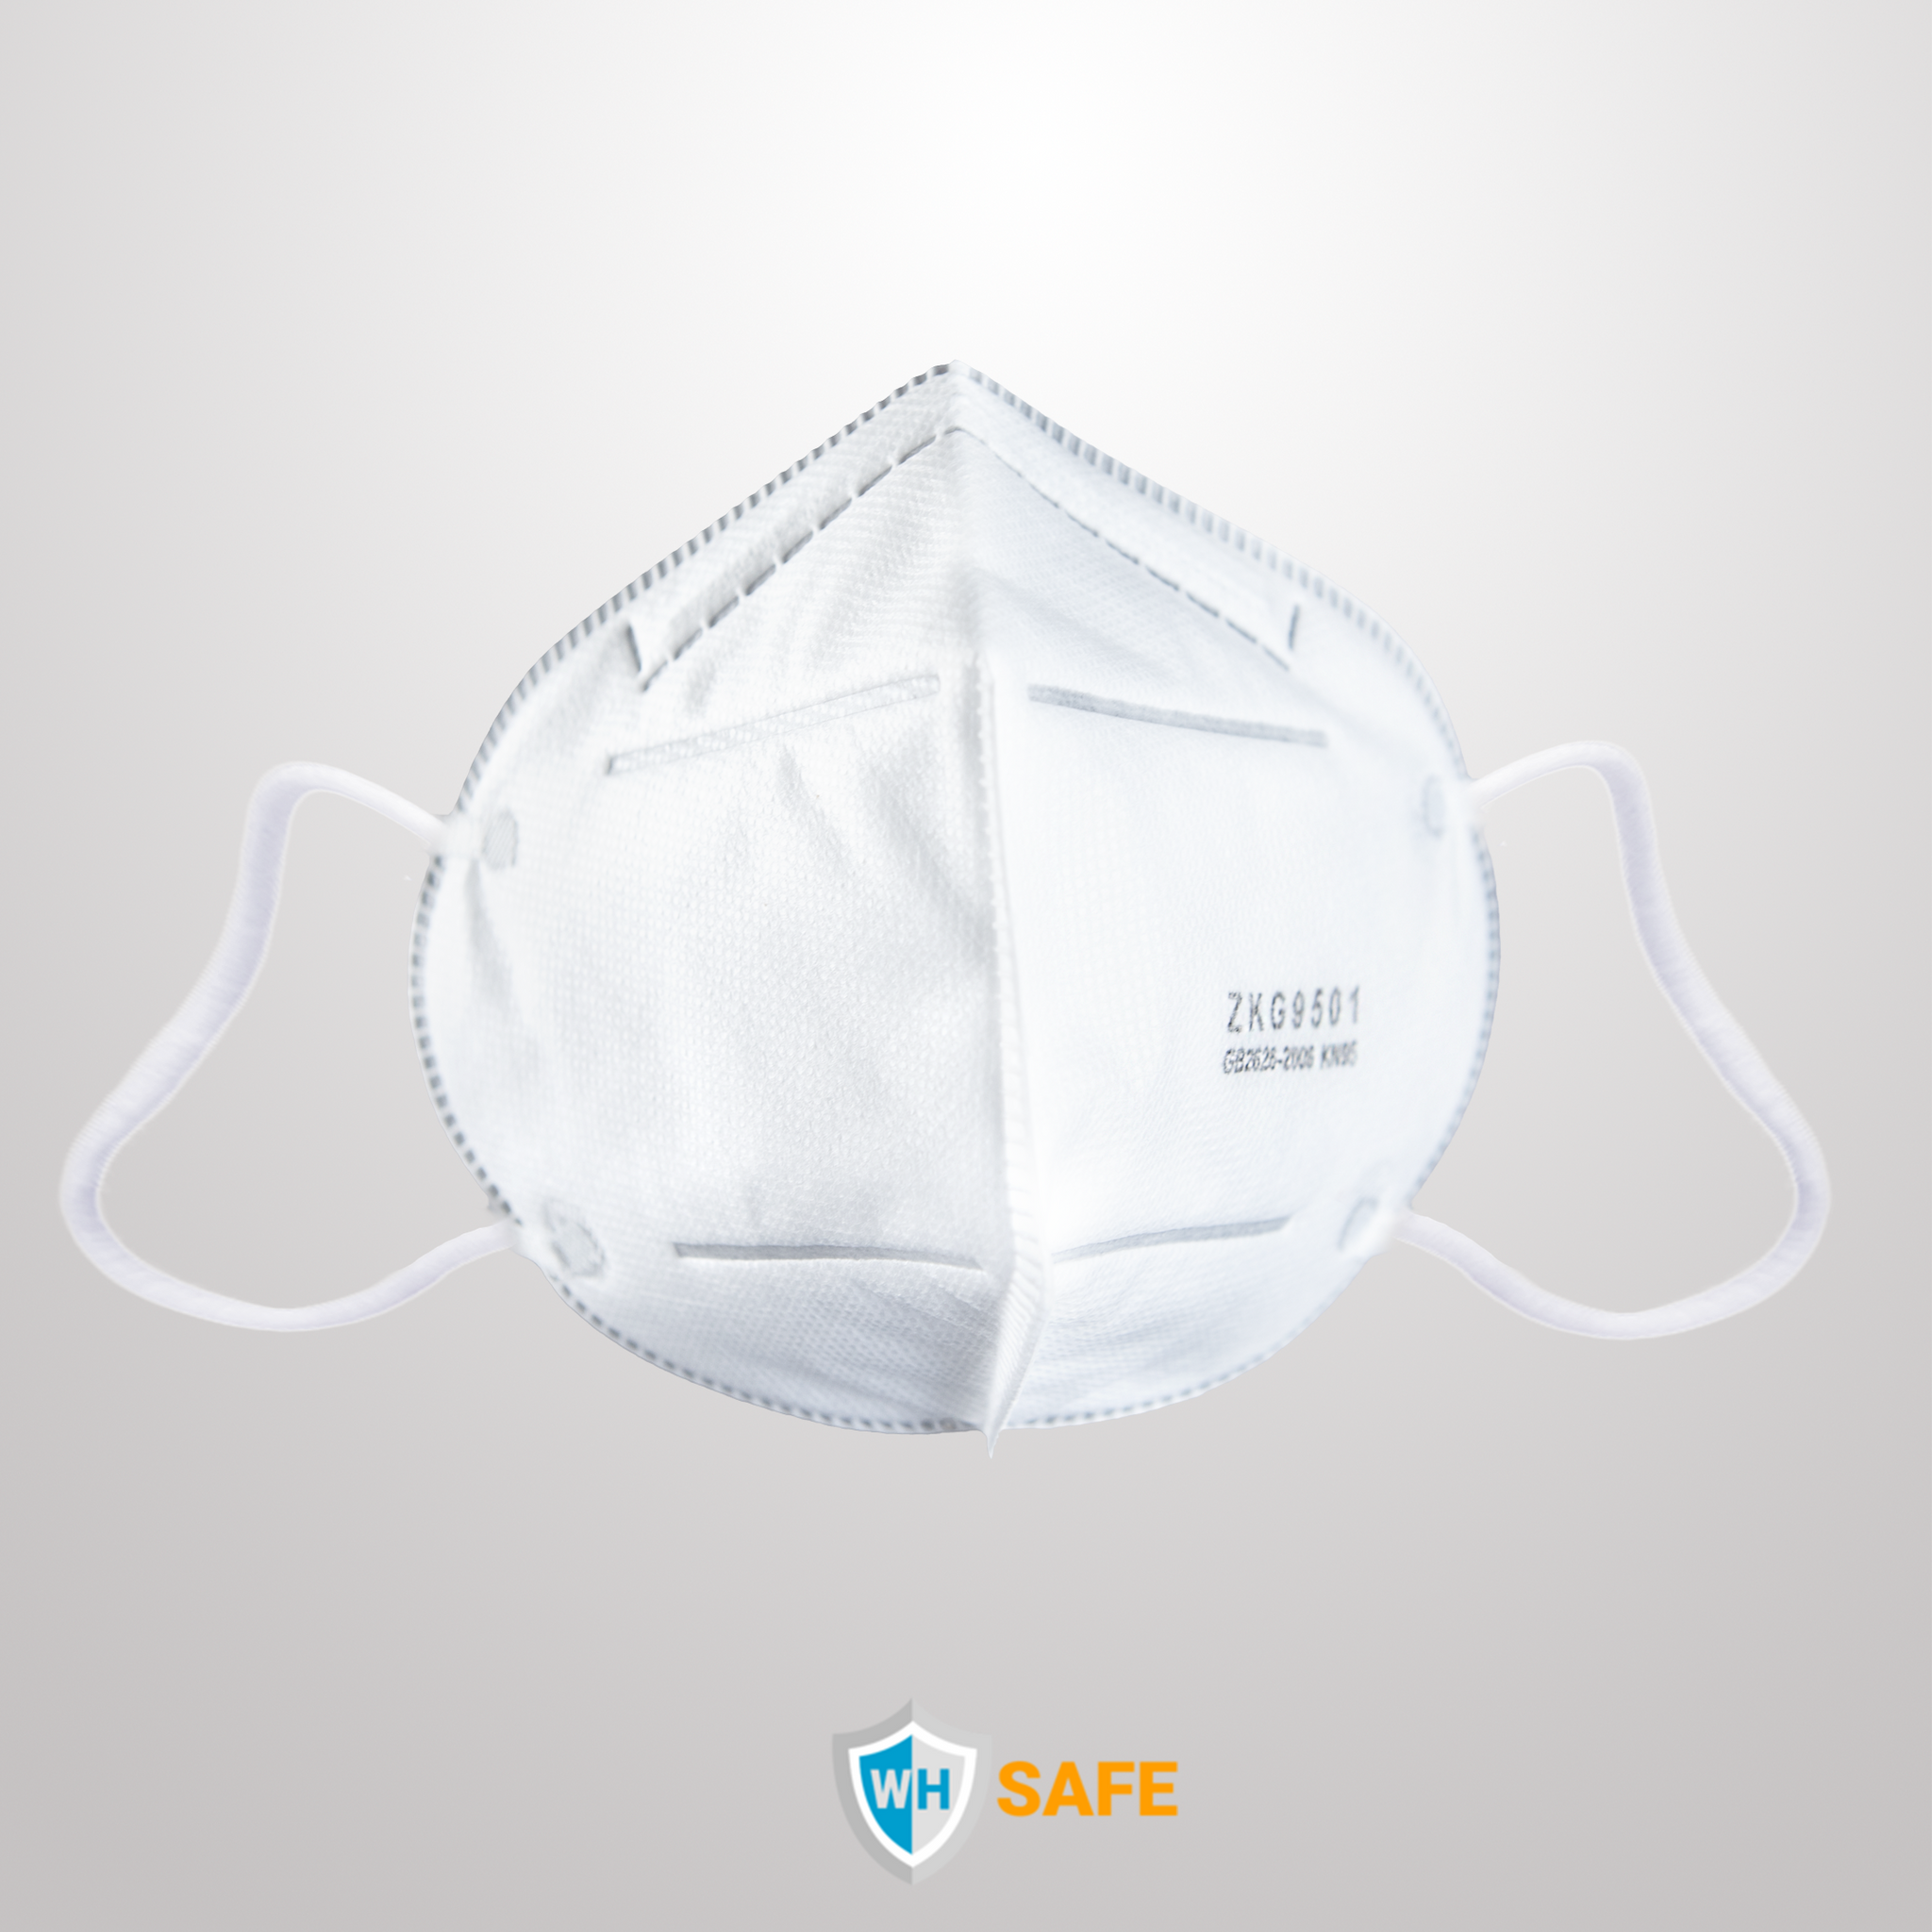 P2 Mask FFP2 CE Respirator Disposable Face Masks 95% Protection ( IN 3 SIZES ) - WHSAFETY